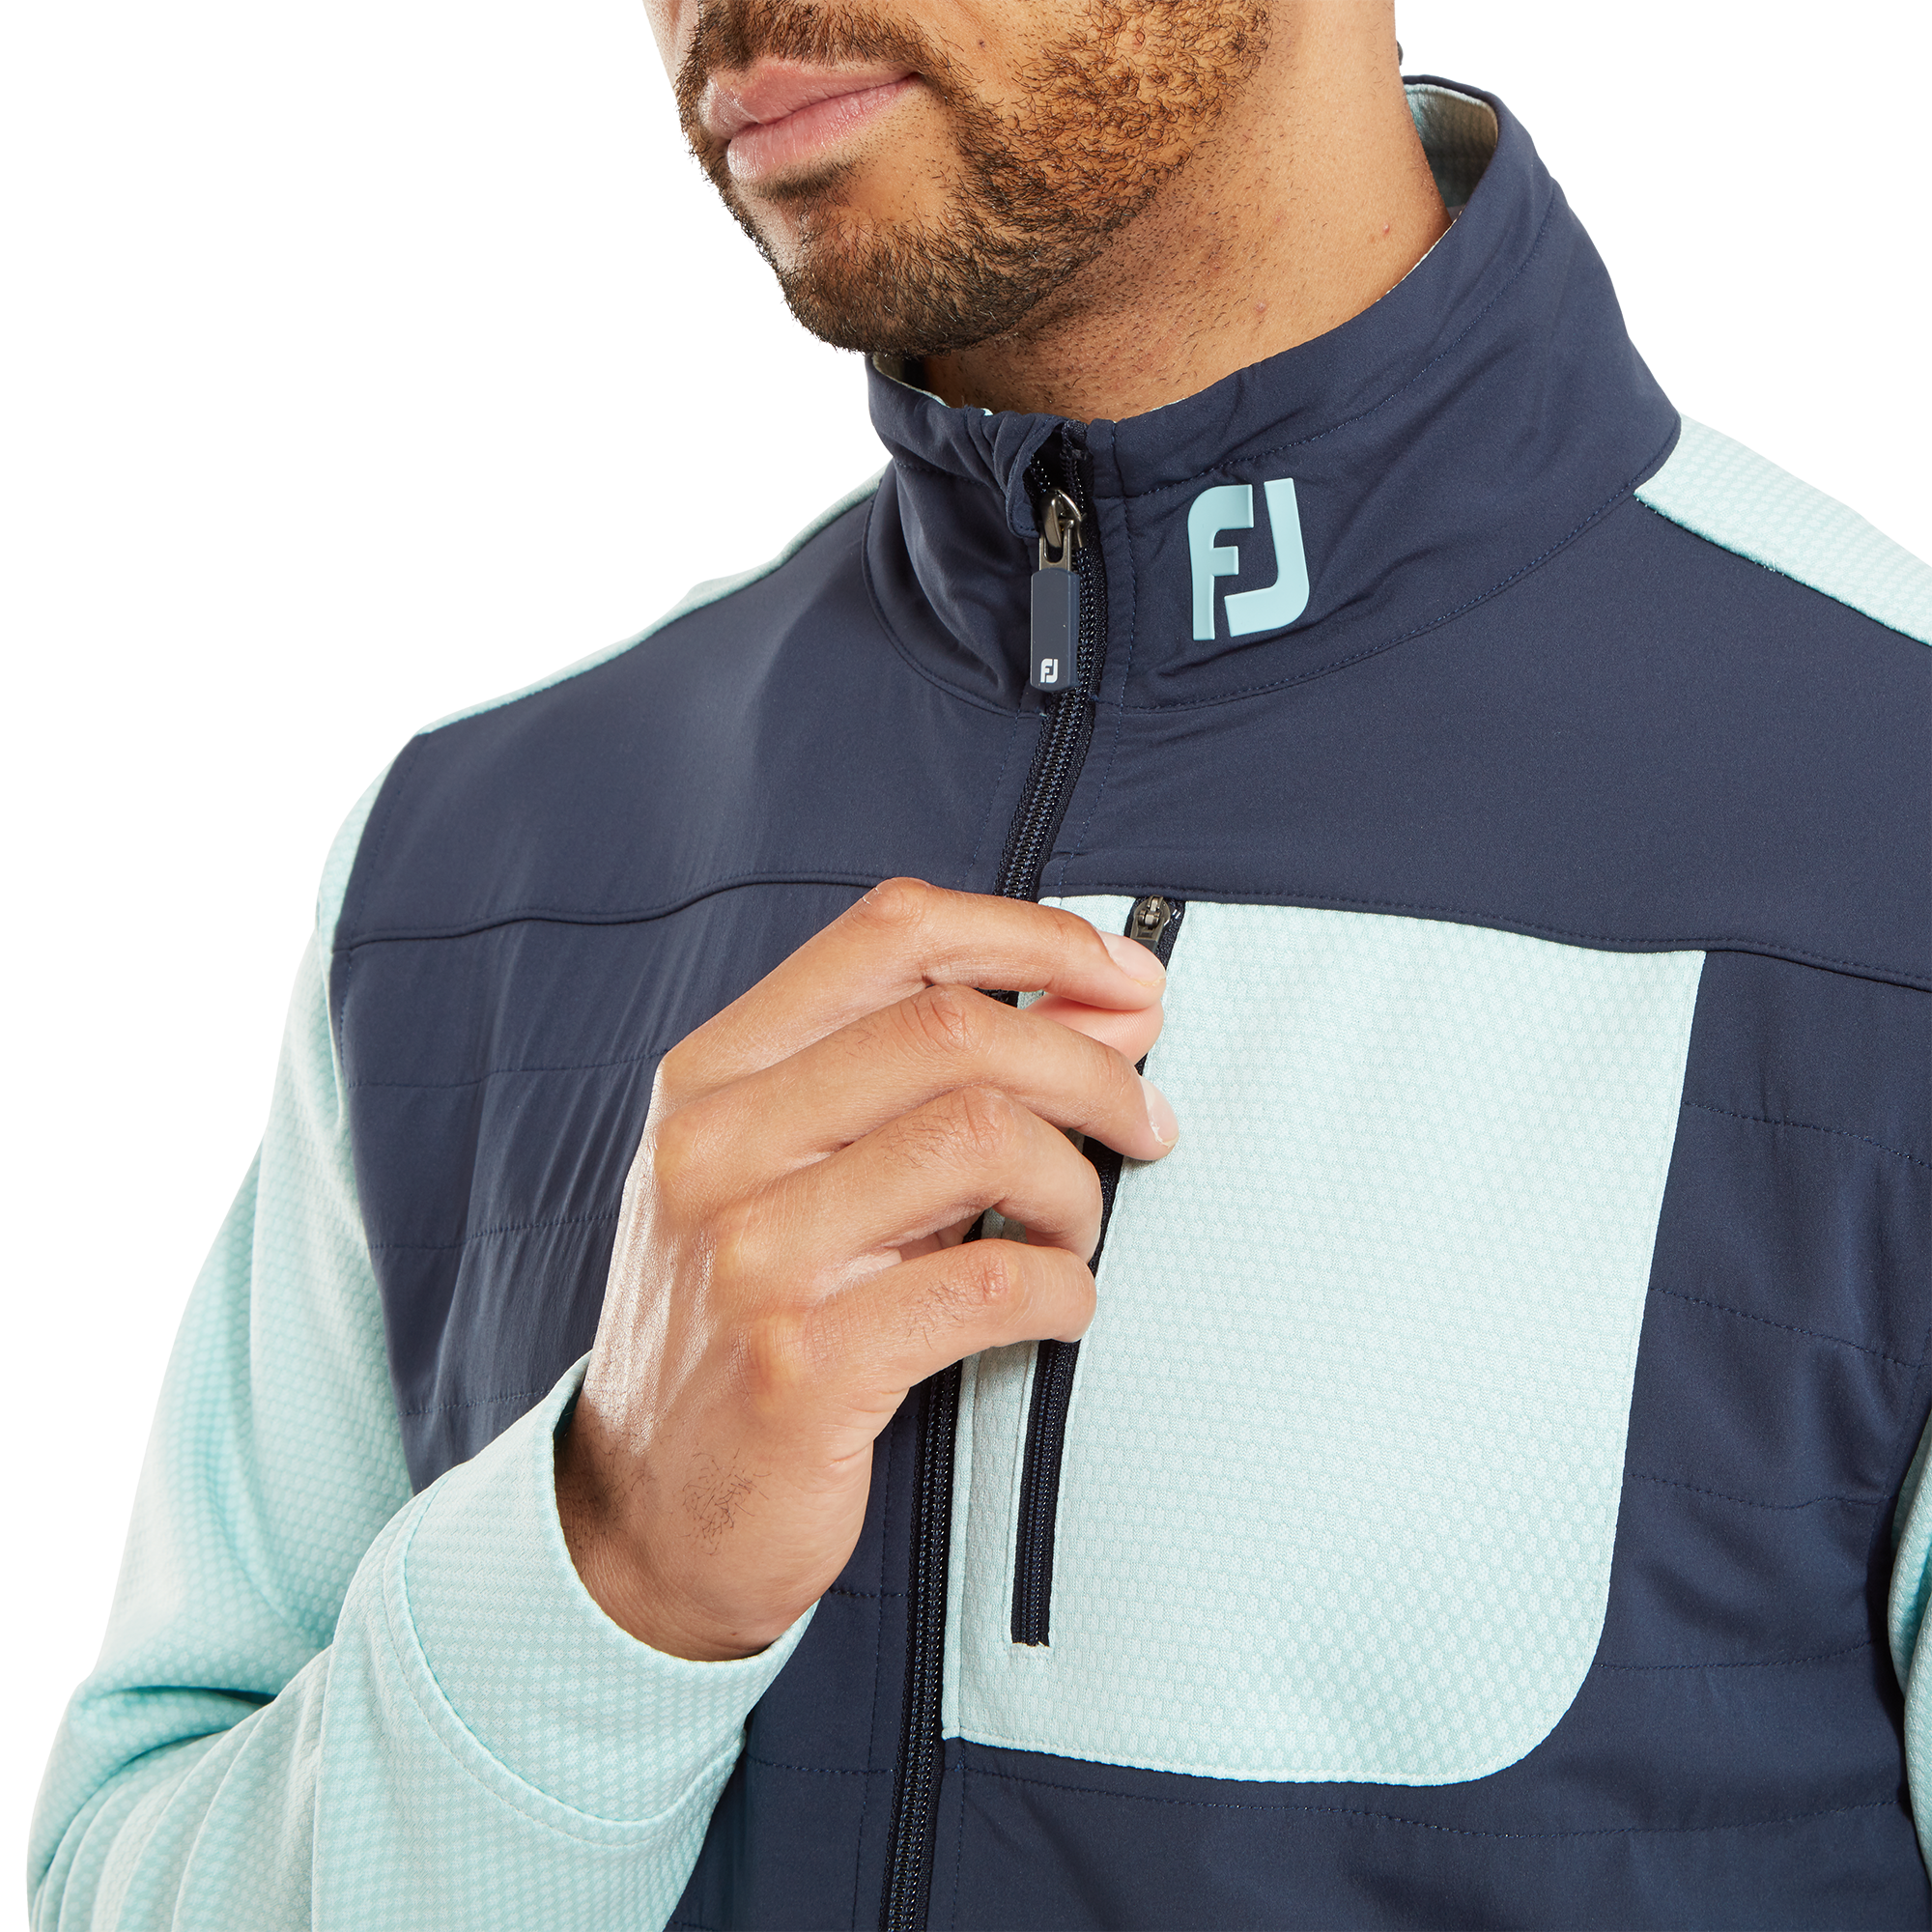 ThermoSeries Hybrid Jacket